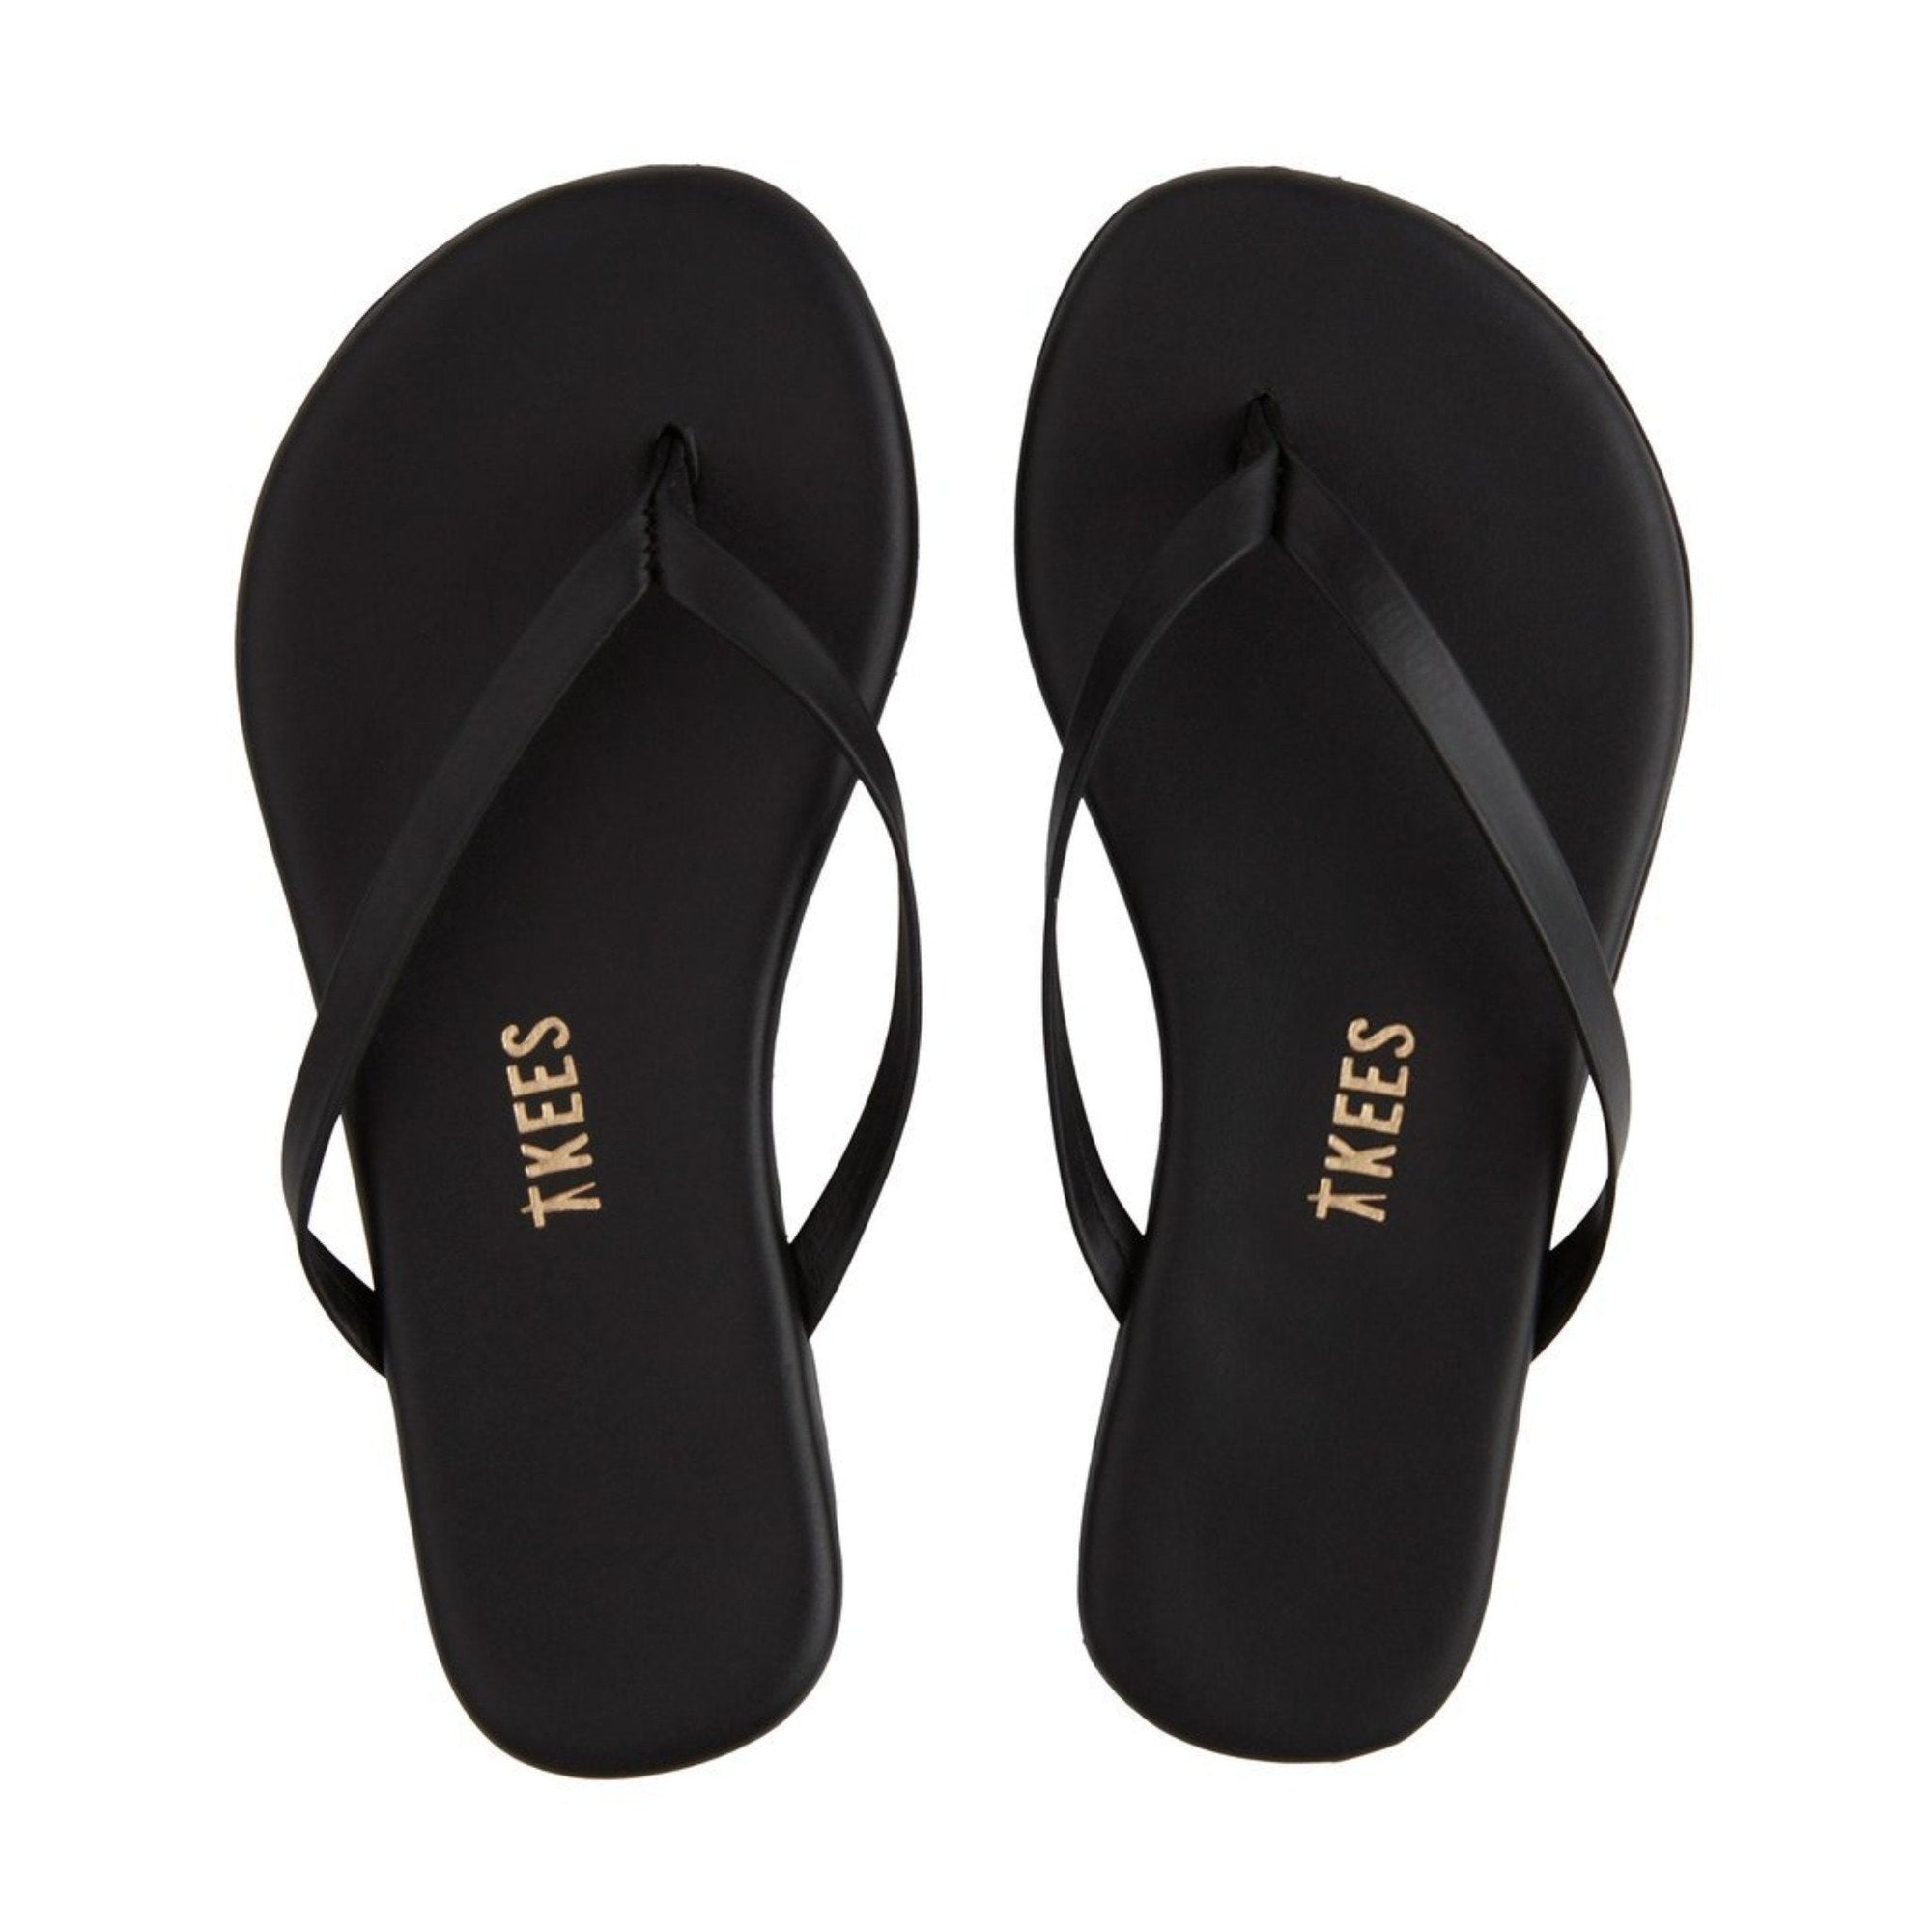 Tkees Classic Black Mini Solid Slides - a Spirit Animal - Flip Flops $30-$60 1 active May 2023